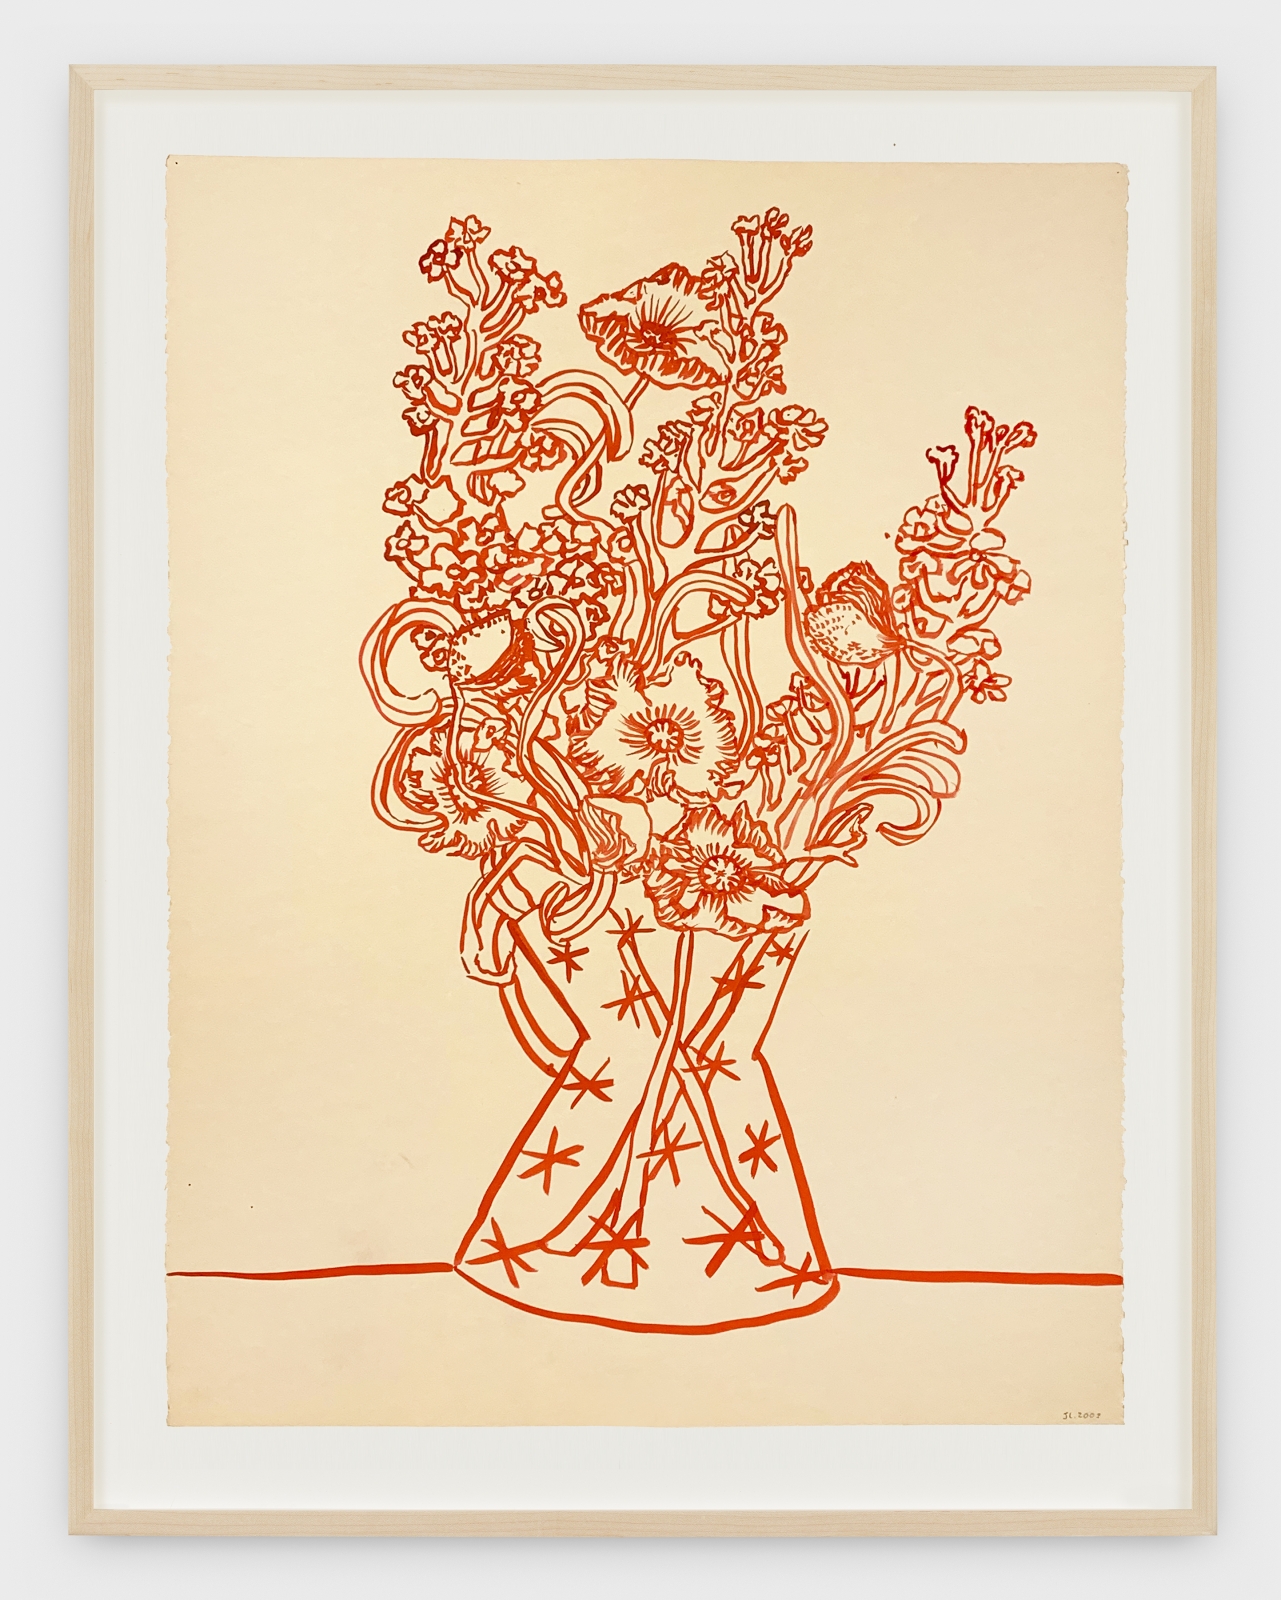 Judith Linhares
Untitled (Flower Study), 2003
ink on paper
30 x 22 1/2 ins.
76.2 x 57.1 cm